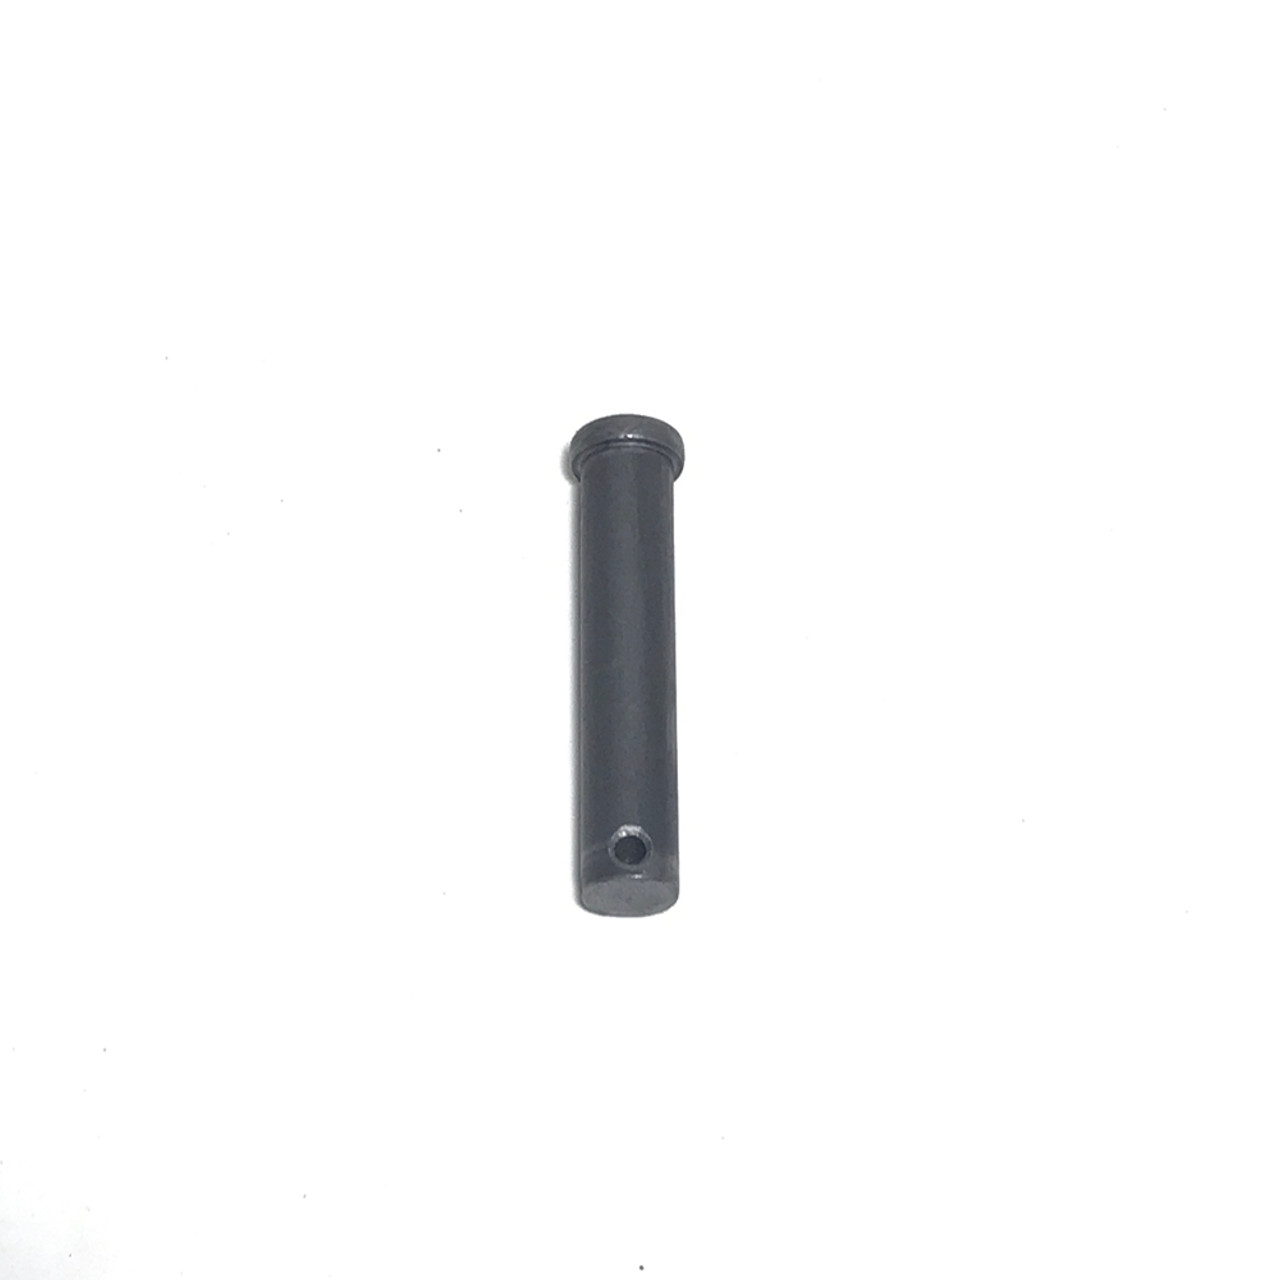 CLEVIS PIN 1/2 X 2 1/2